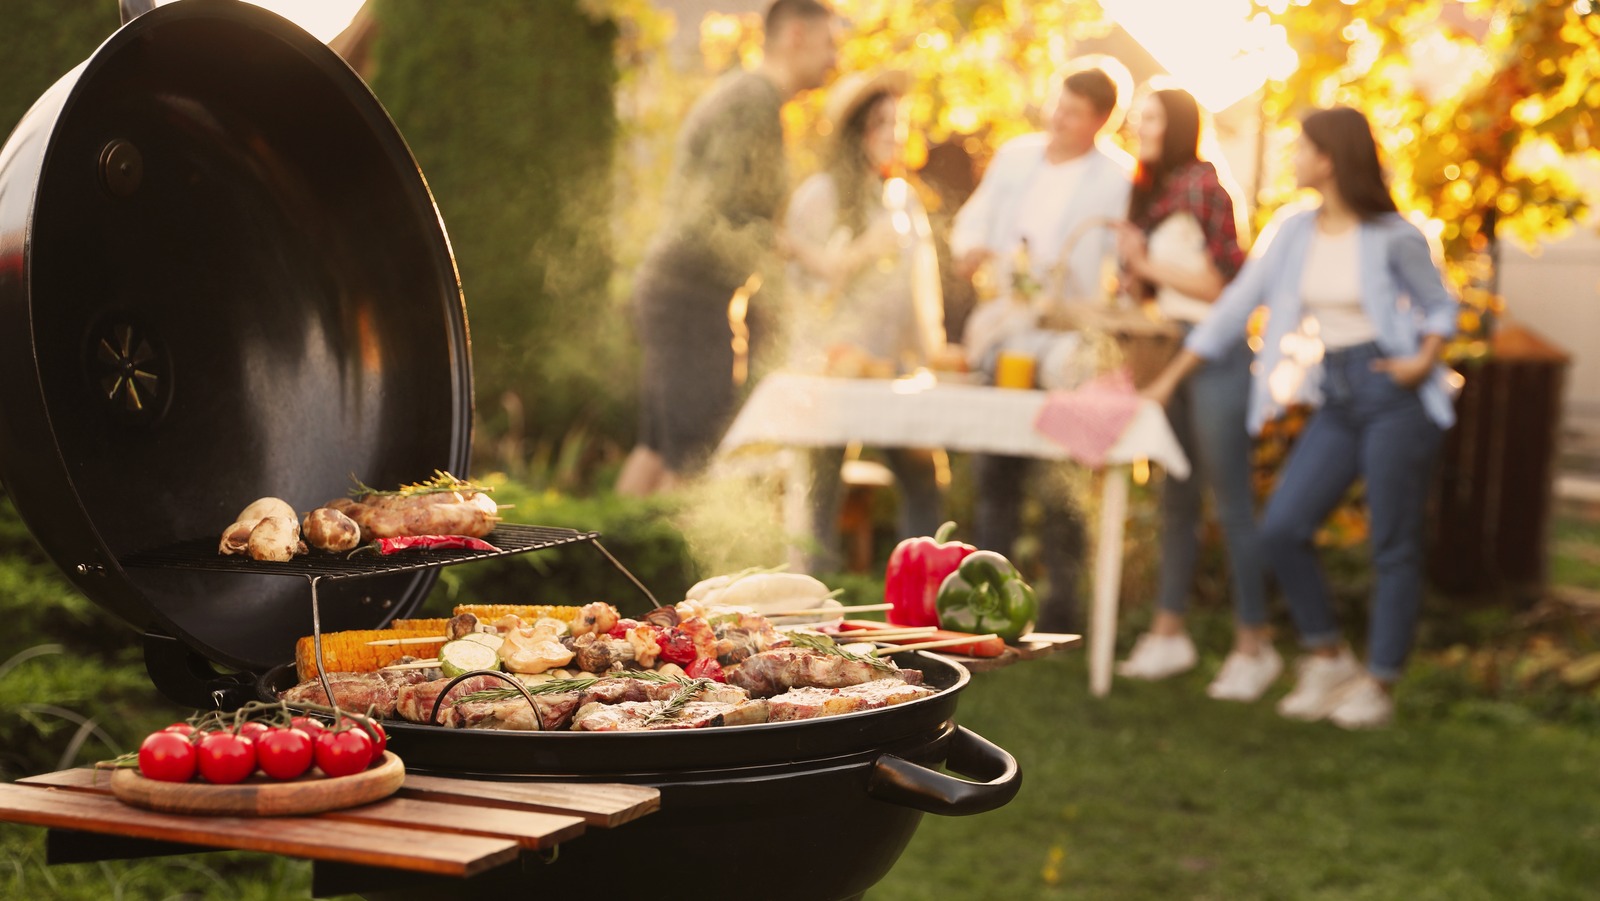 The best way to clean you grill for great BBQs this summer